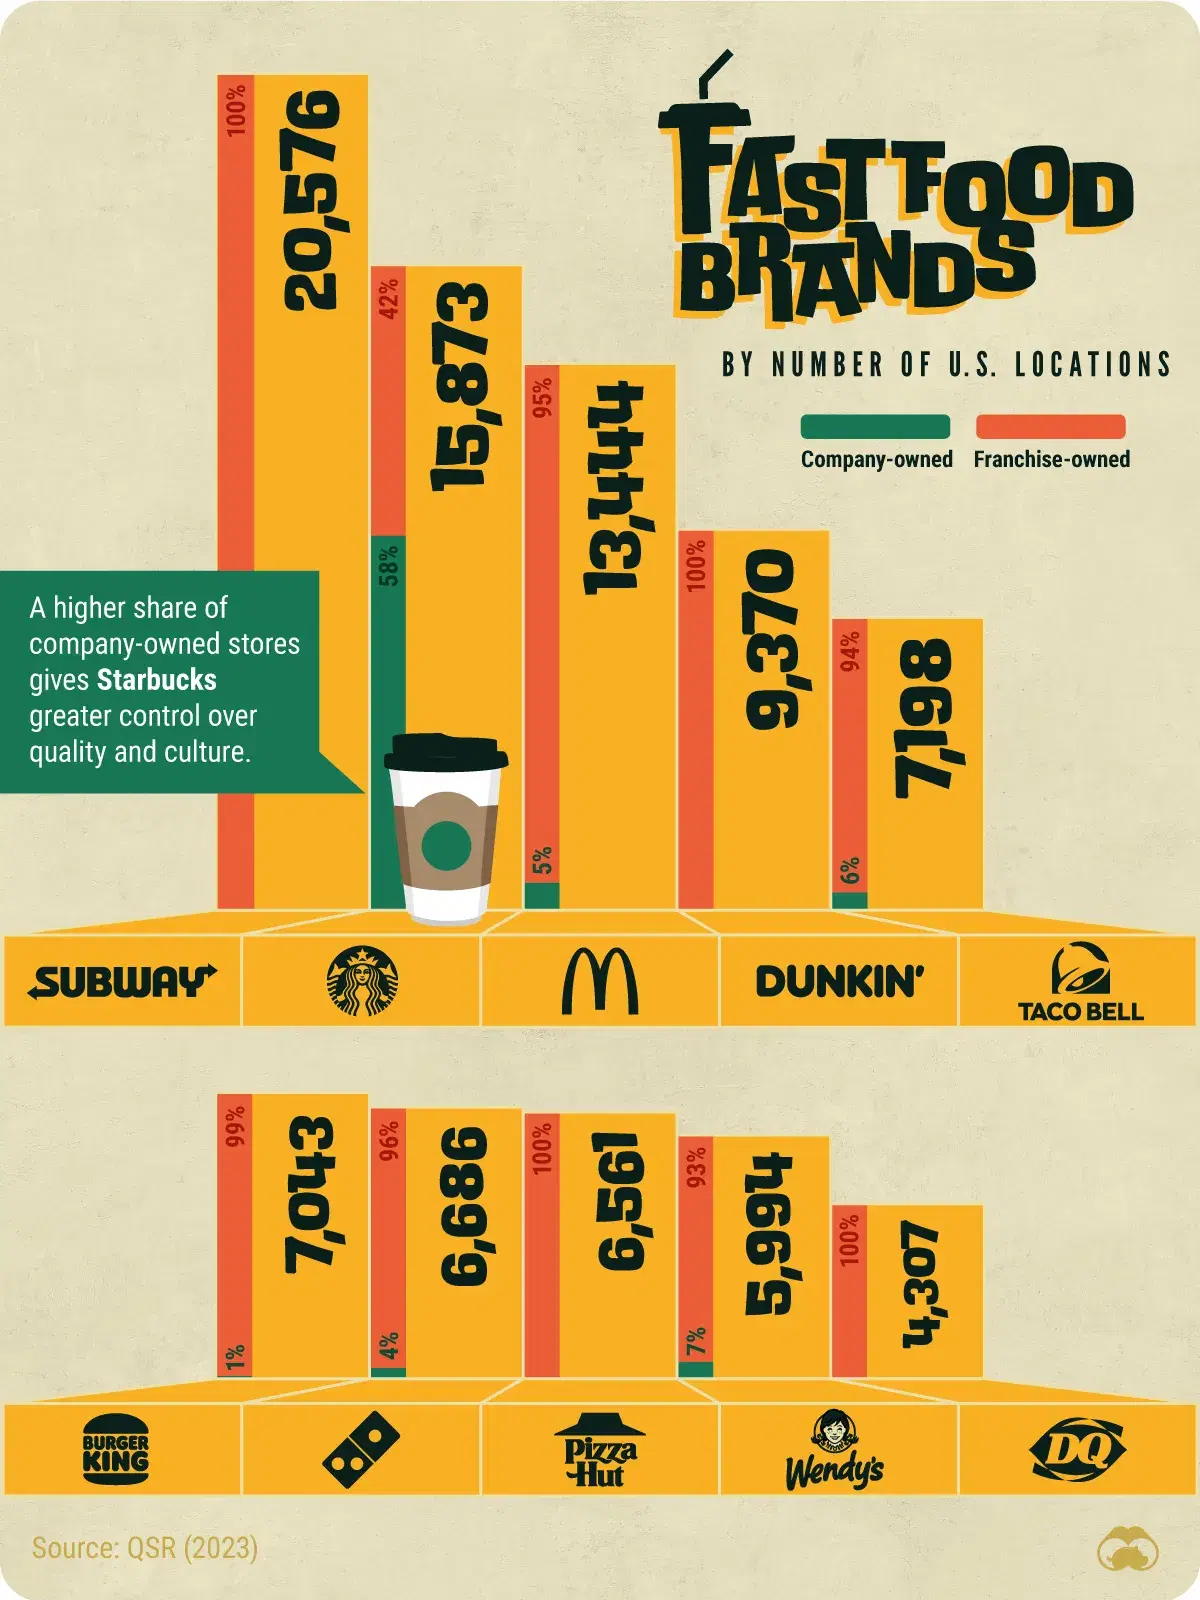 These Fast Food Brands Had the Most U.S. Locations in 2022